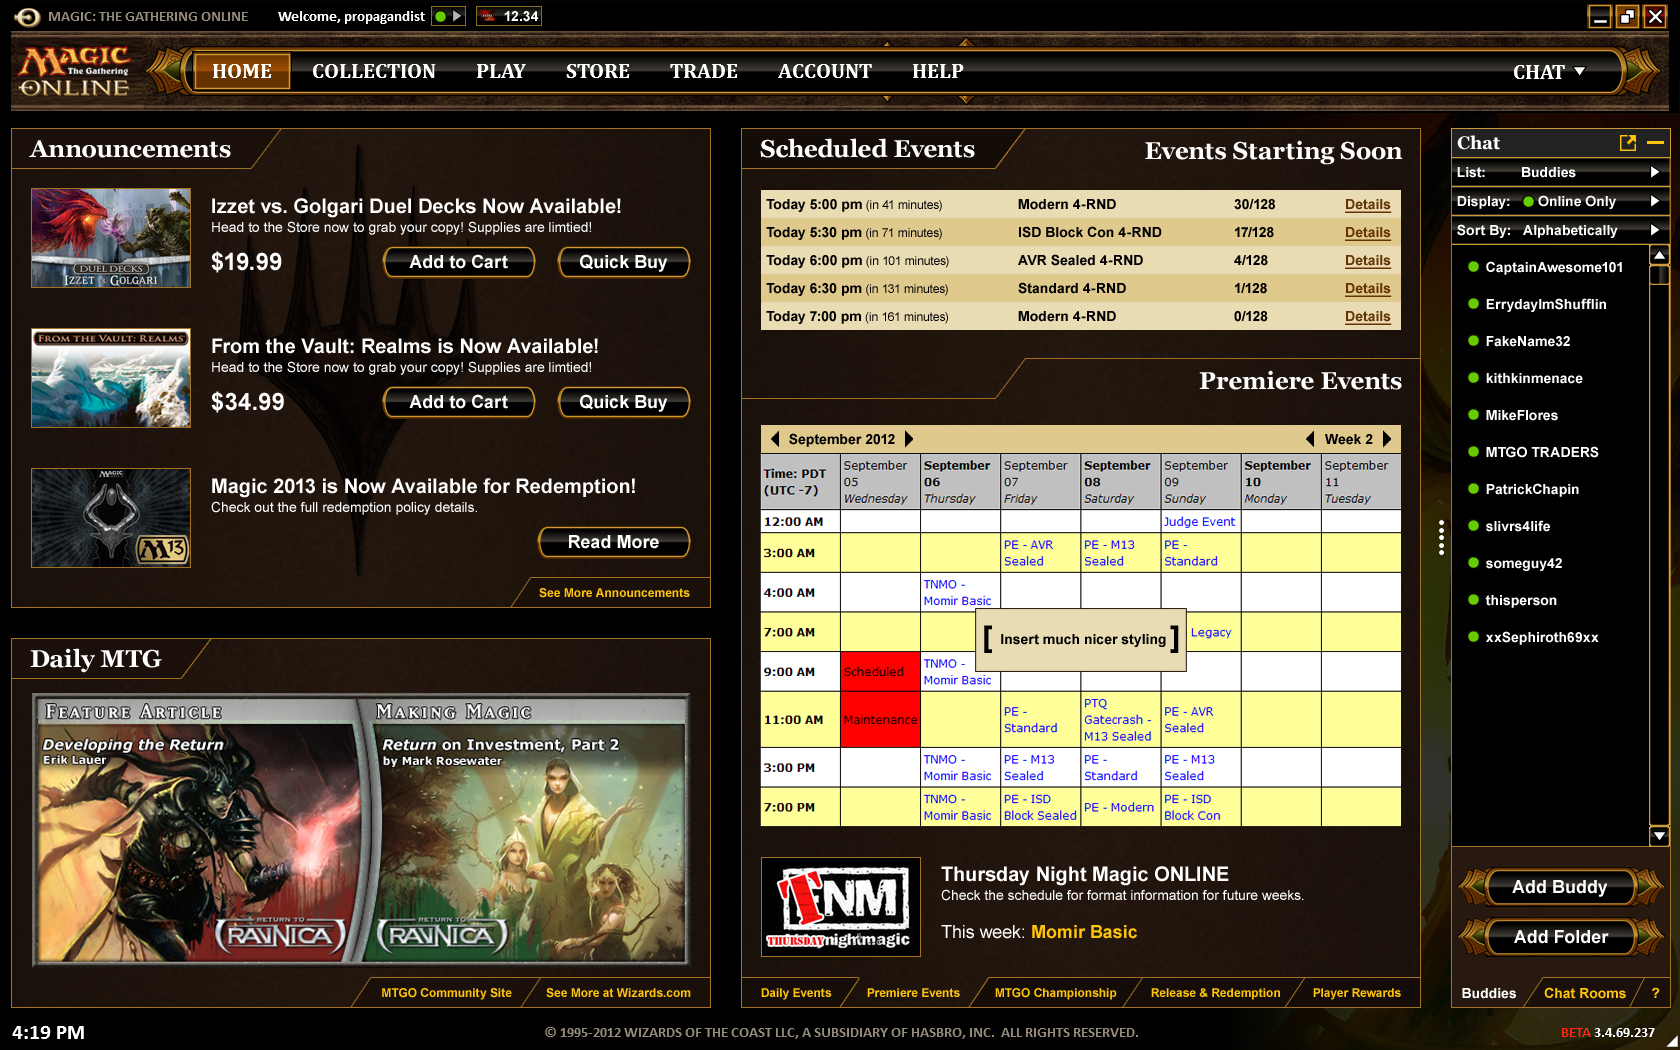 Magic: The Gathering Online UI (Corry's Version)